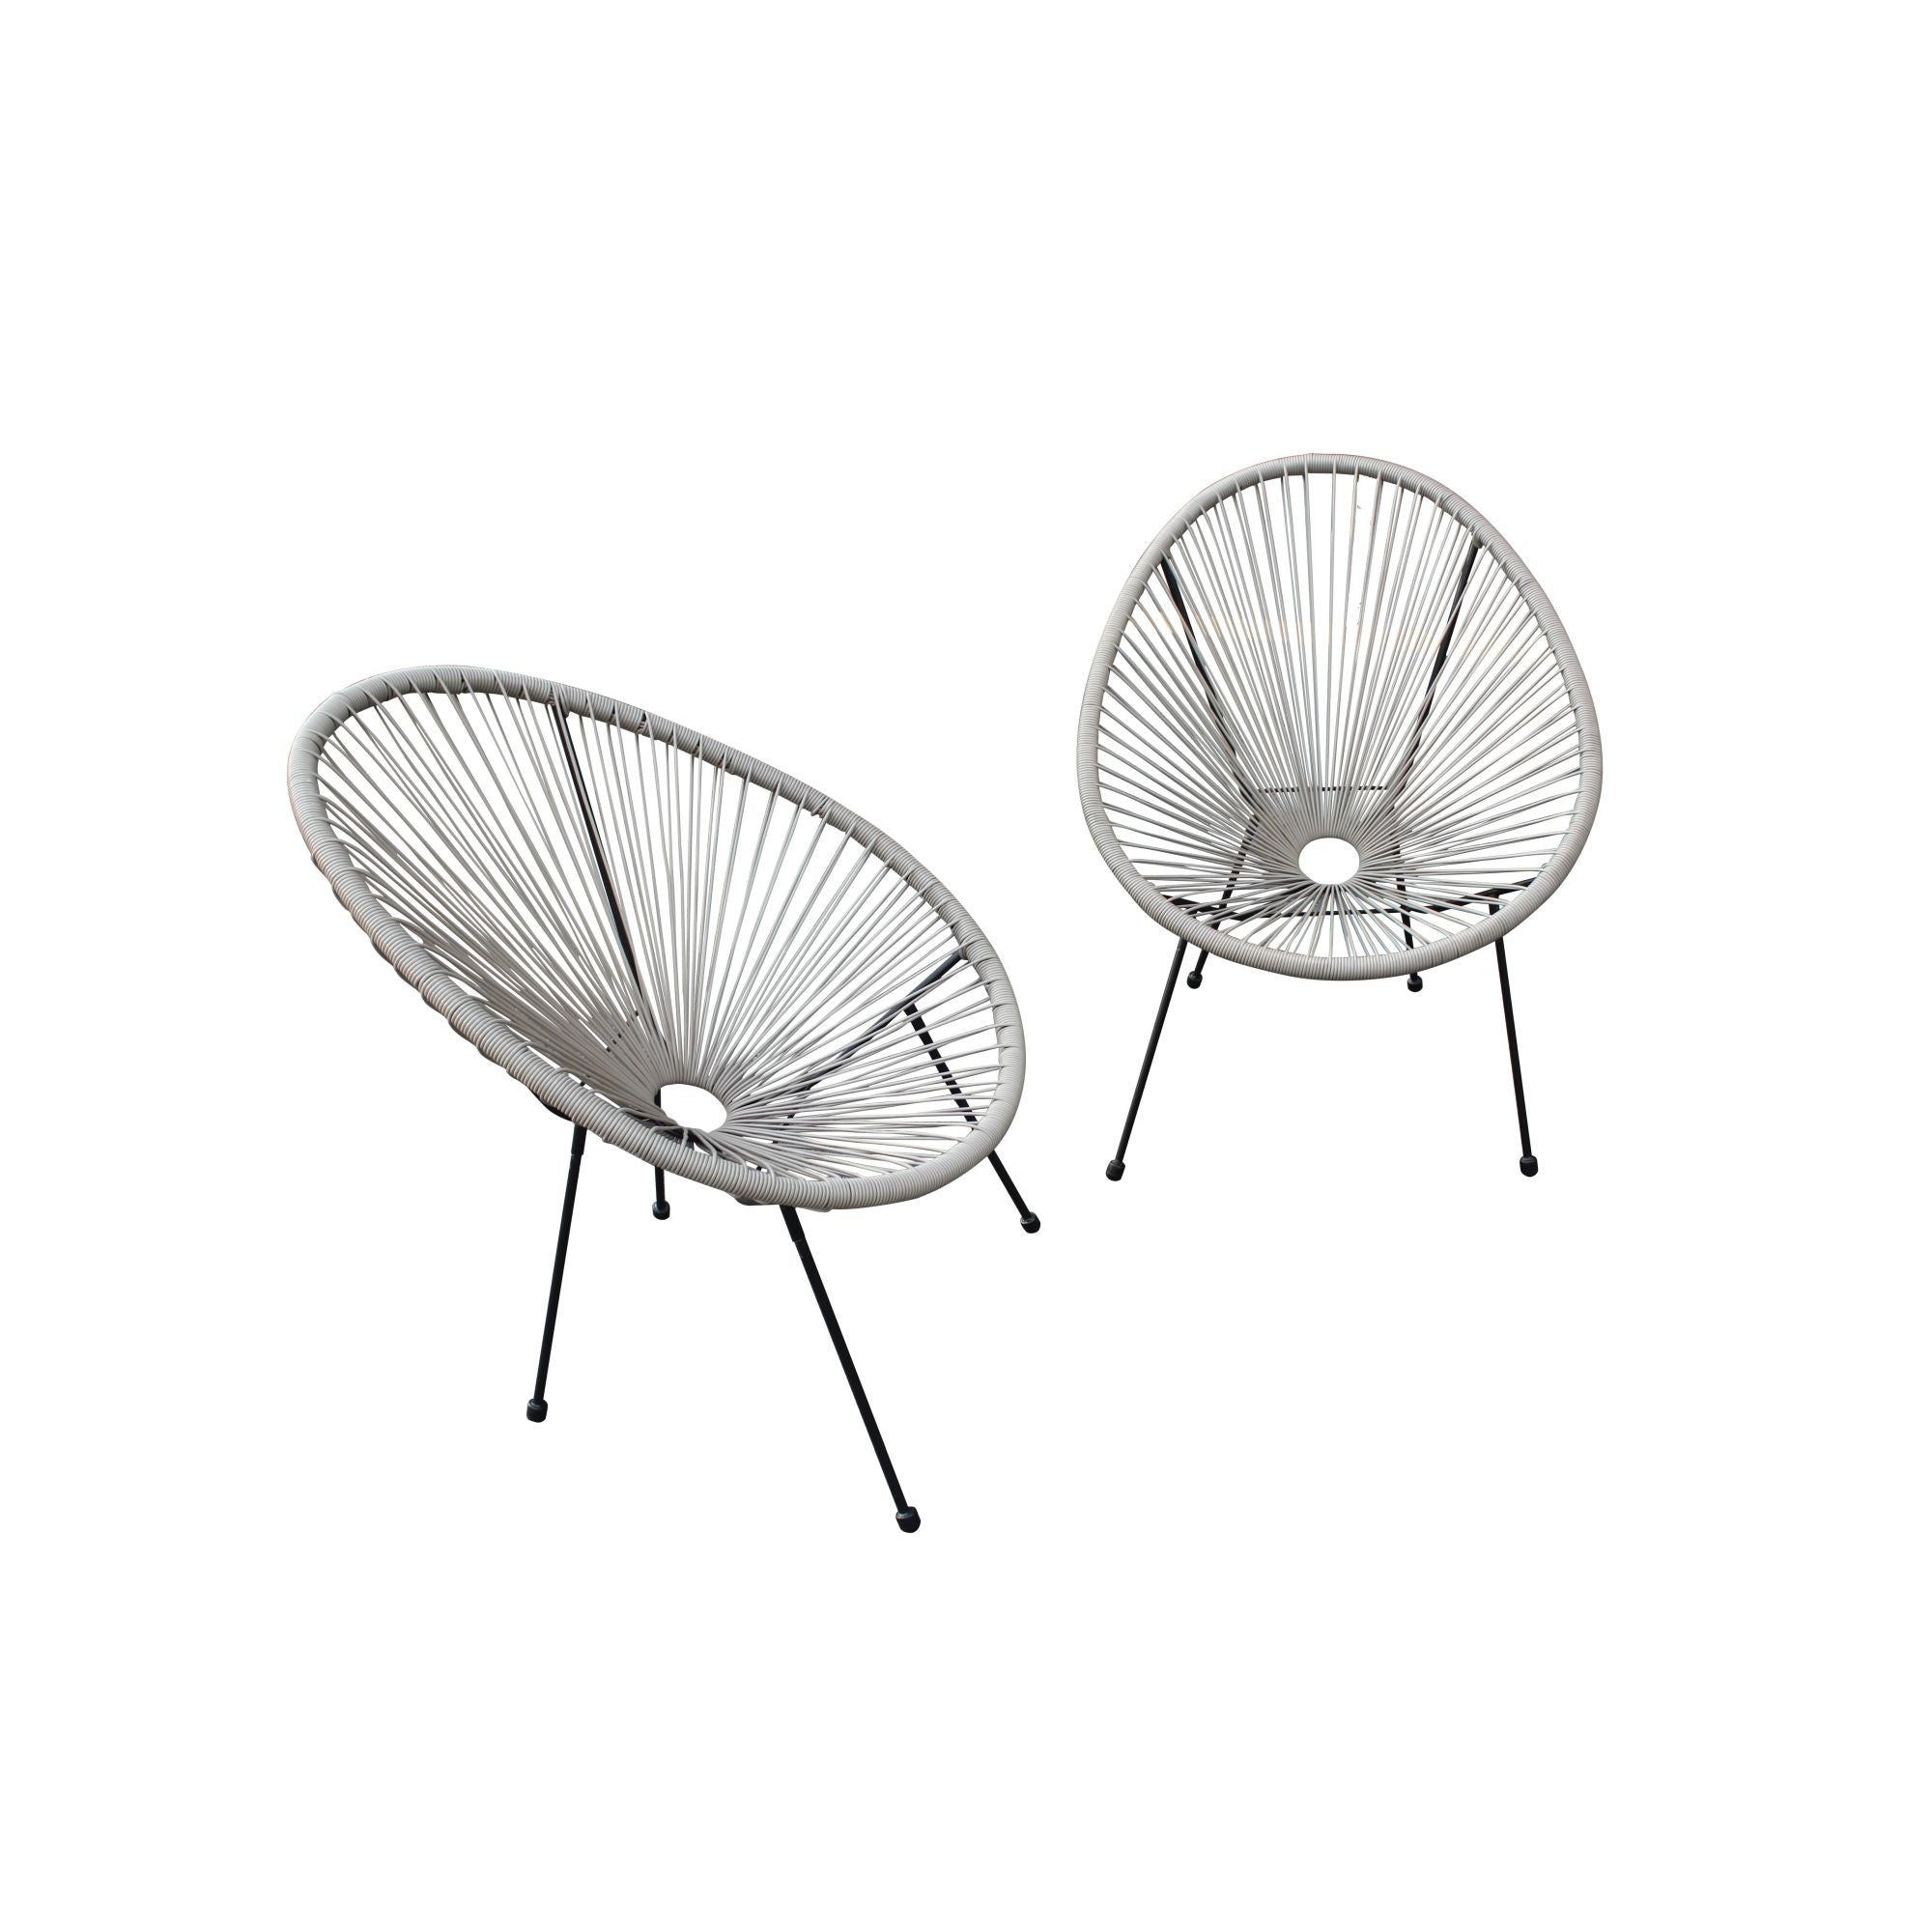 Set of Two Gray Mod Indoor Outdoor String Chairs - Tuesday Morning-Outdoor Chairs